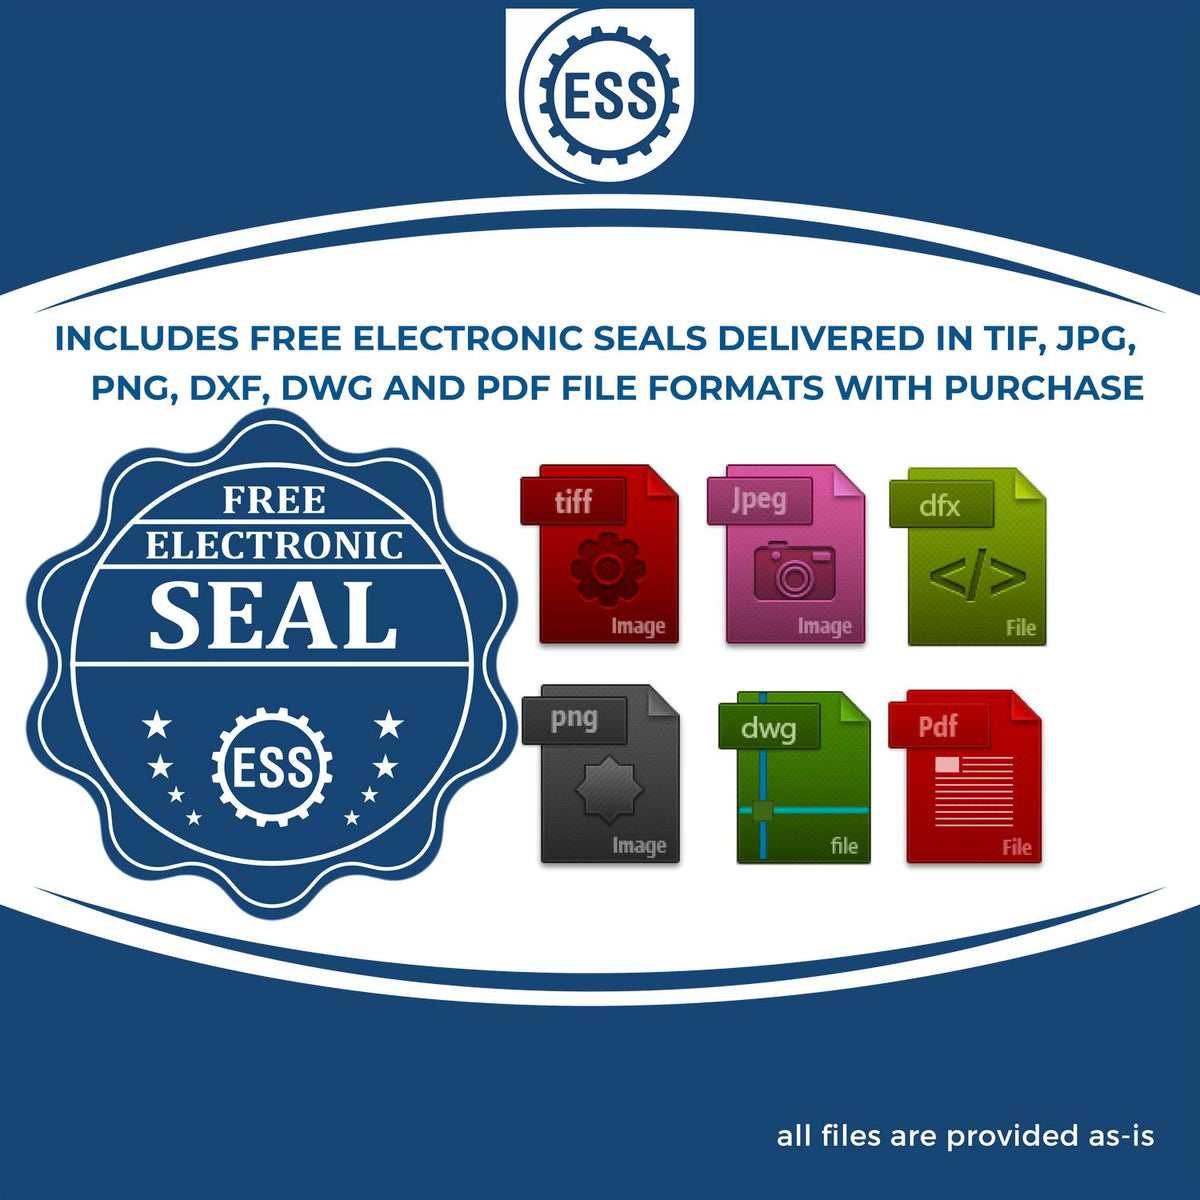 An infographic for the free electronic seal for the Premium MaxLight Pre-Inked Kansas Landscape Architectural Stamp illustrating the different file type icons such as DXF, DWG, TIF, JPG and PNG.